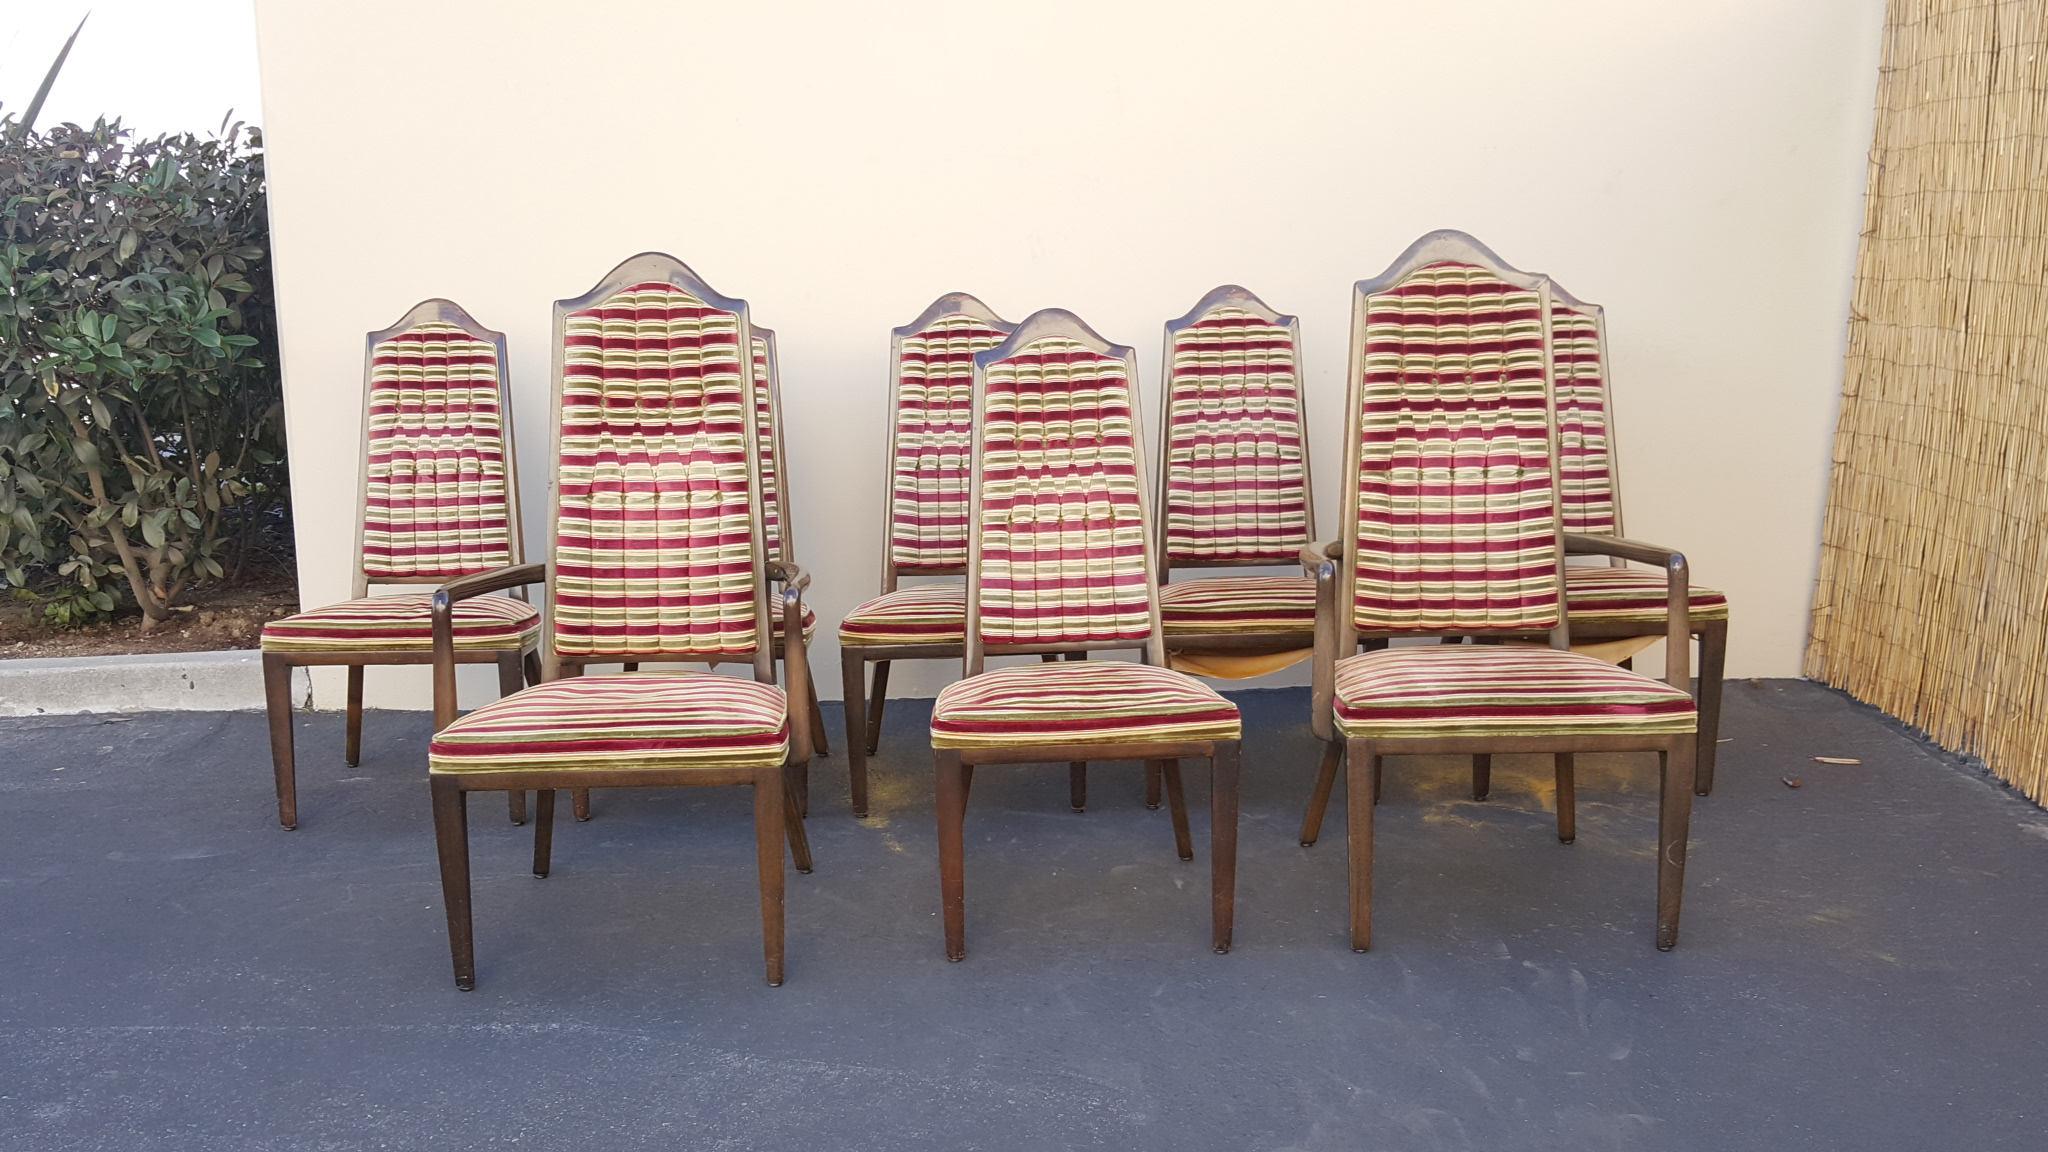 Set of 8 Monteverdi Young dining chairs designed by Maurice Bailey. Original Vintage Velvet Upholstery, Original Mahogany With Vintage Monteverdi Young Labels. 2 Captain Chairs and 6 Side Dining Chairs.
These beautiful example Of Maurice Bailey's